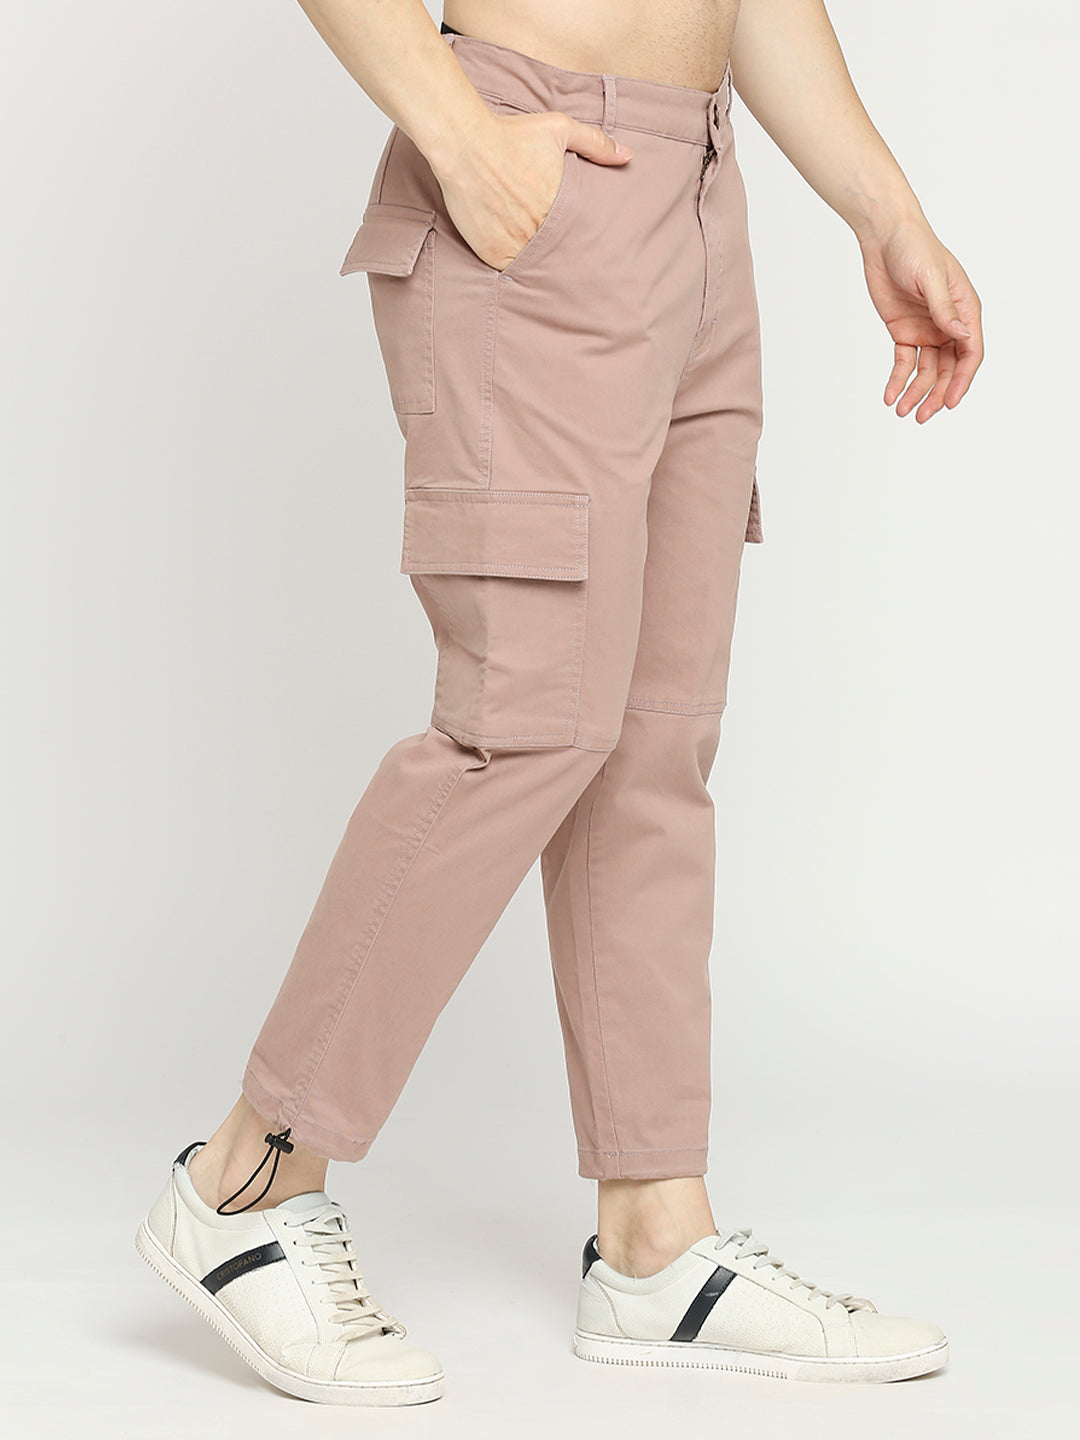 rust cargo pants - buy cargo pants online at great price – DAKS NEO  CLOTHING CO.INDIA